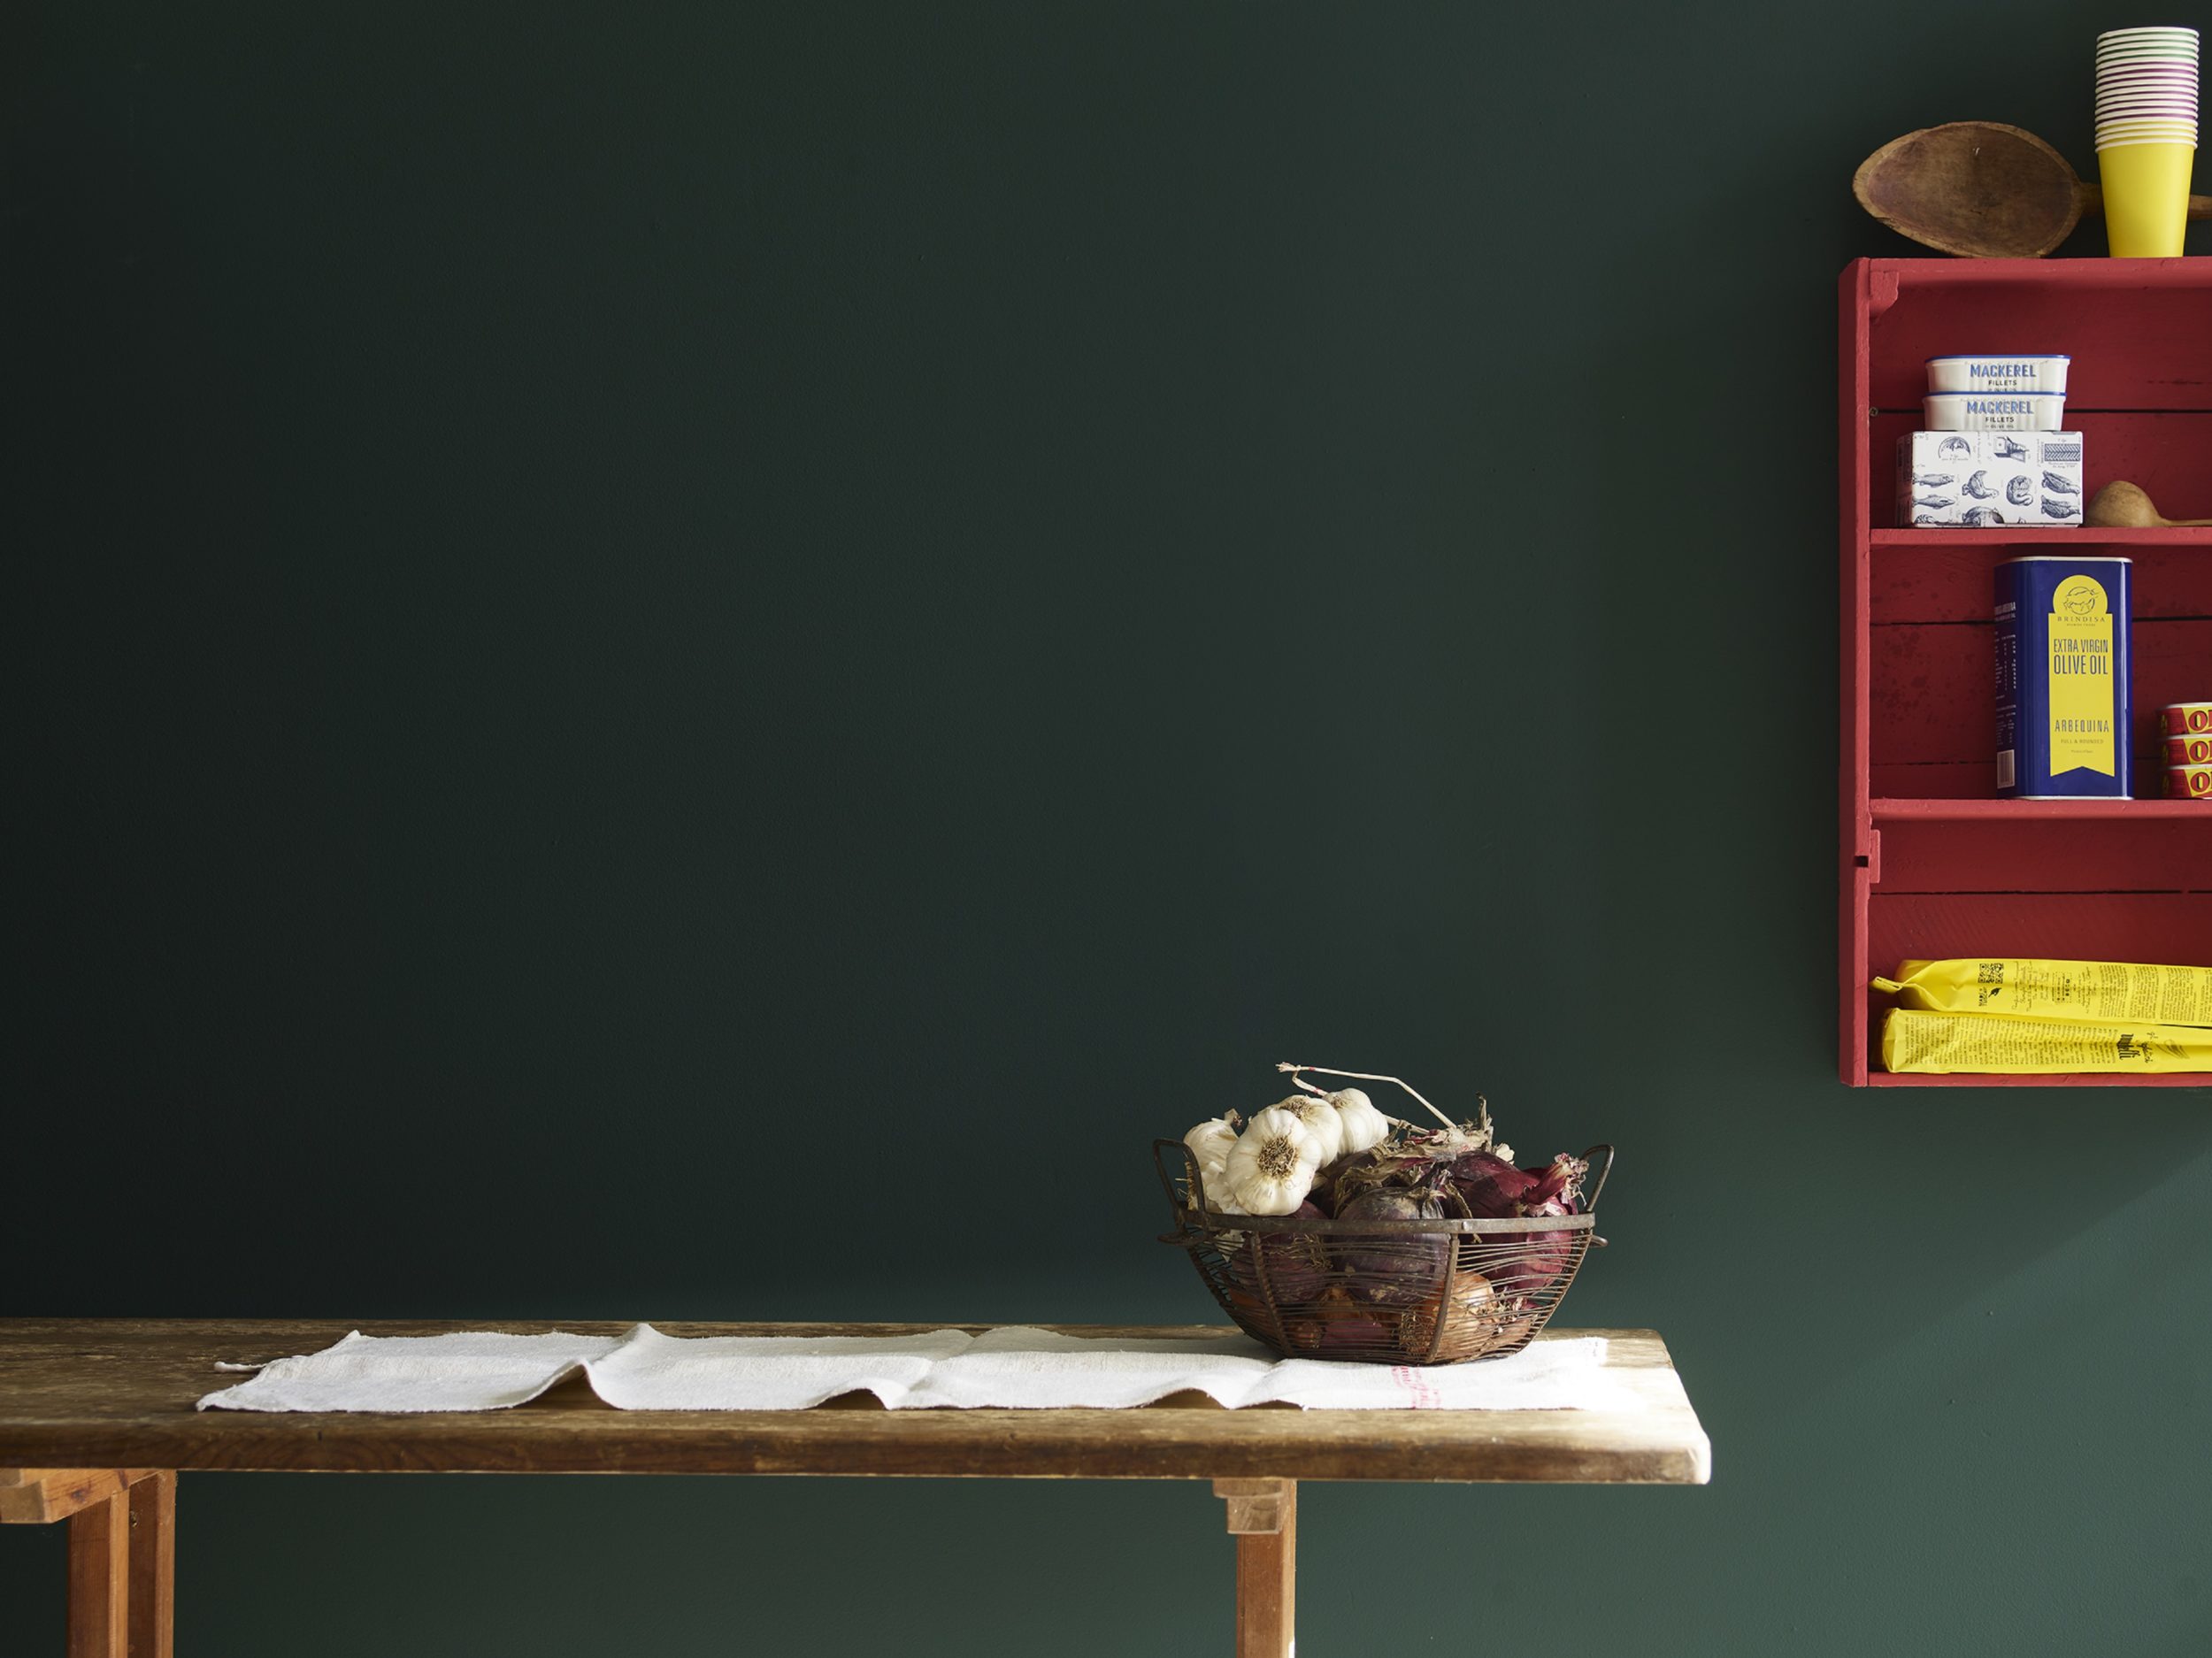 Annie Sloan Wall Paint in Knightsbridge Green Lifestyle Image featuring Chalk Paint Emperor's Silk Shelves